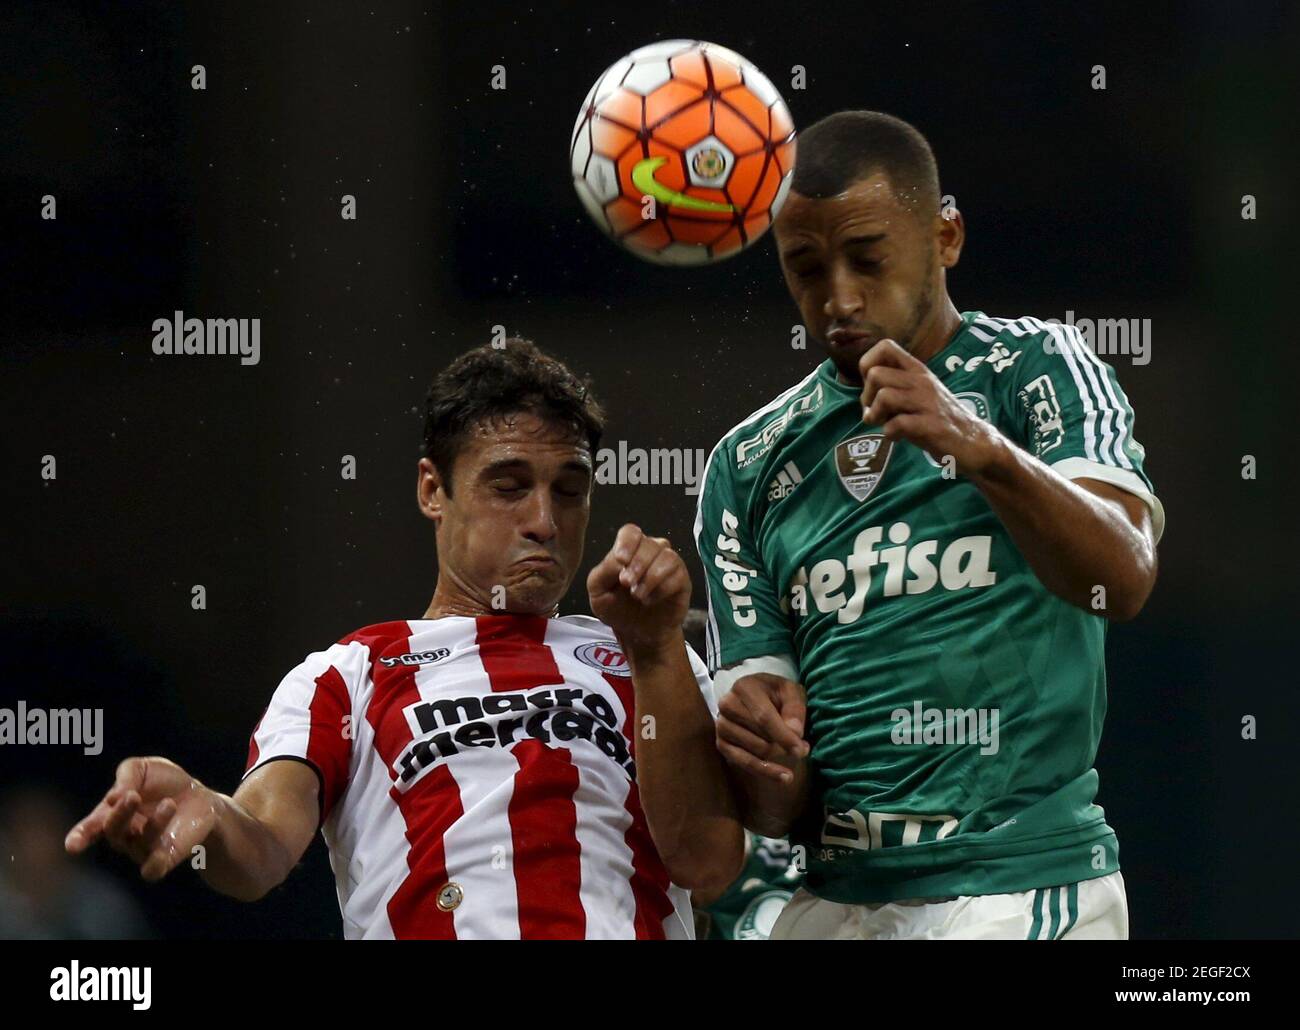 Football Soccer - Palmeiras v River Plate - Copa Libertadores - Arena Allianz stadium, Sao Paulo, Brazil 14/4/16. Brazil's Palmeiras Vitor Hugo (R) in action against Uruguay's River Plate Dario Flores.  REUTERS/Paulo Whitaker   Picture Supplied by Action Images Stock Photo